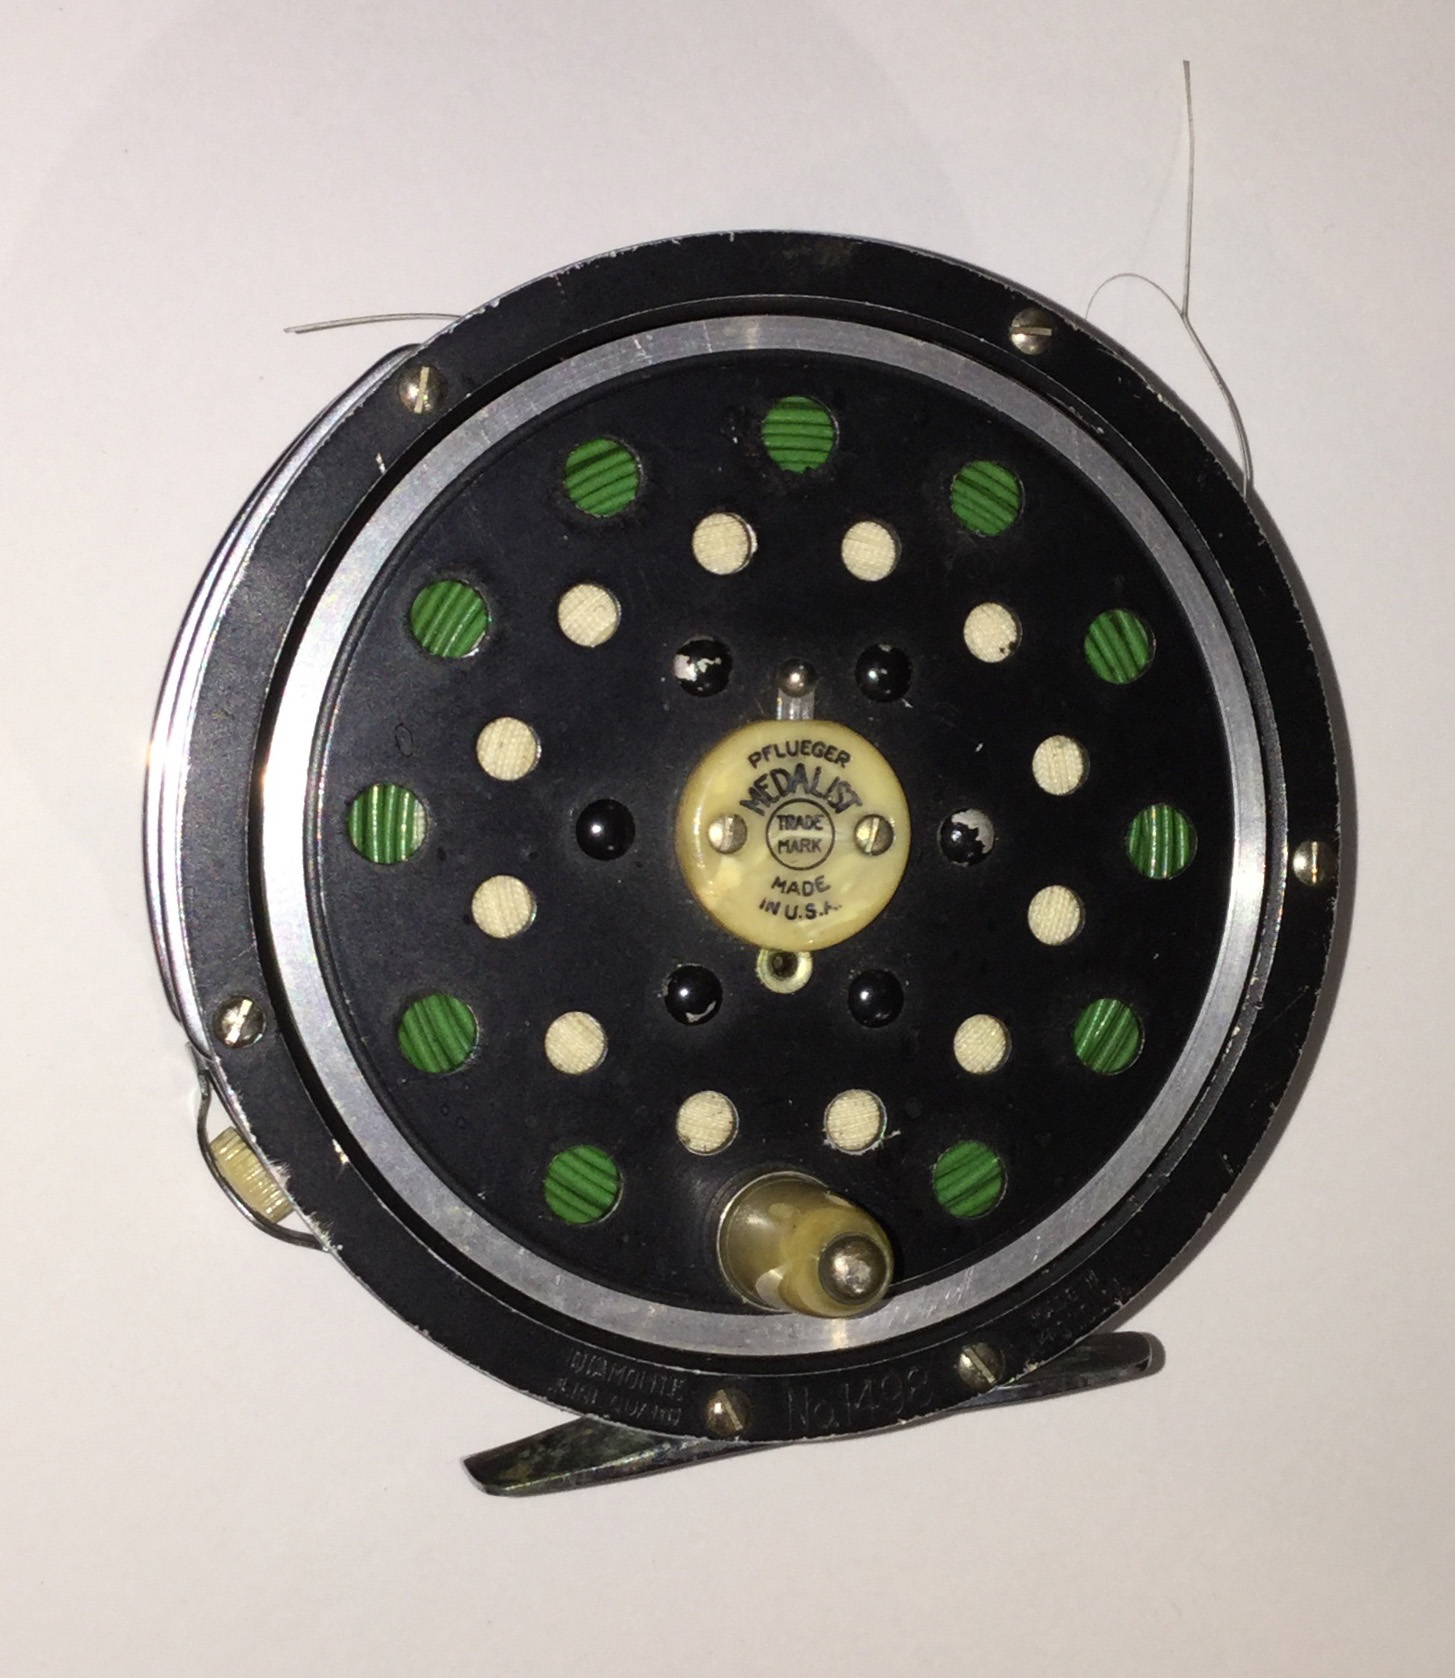 Sold at Auction: Pflueger Medalist Fly Reel No. 1495